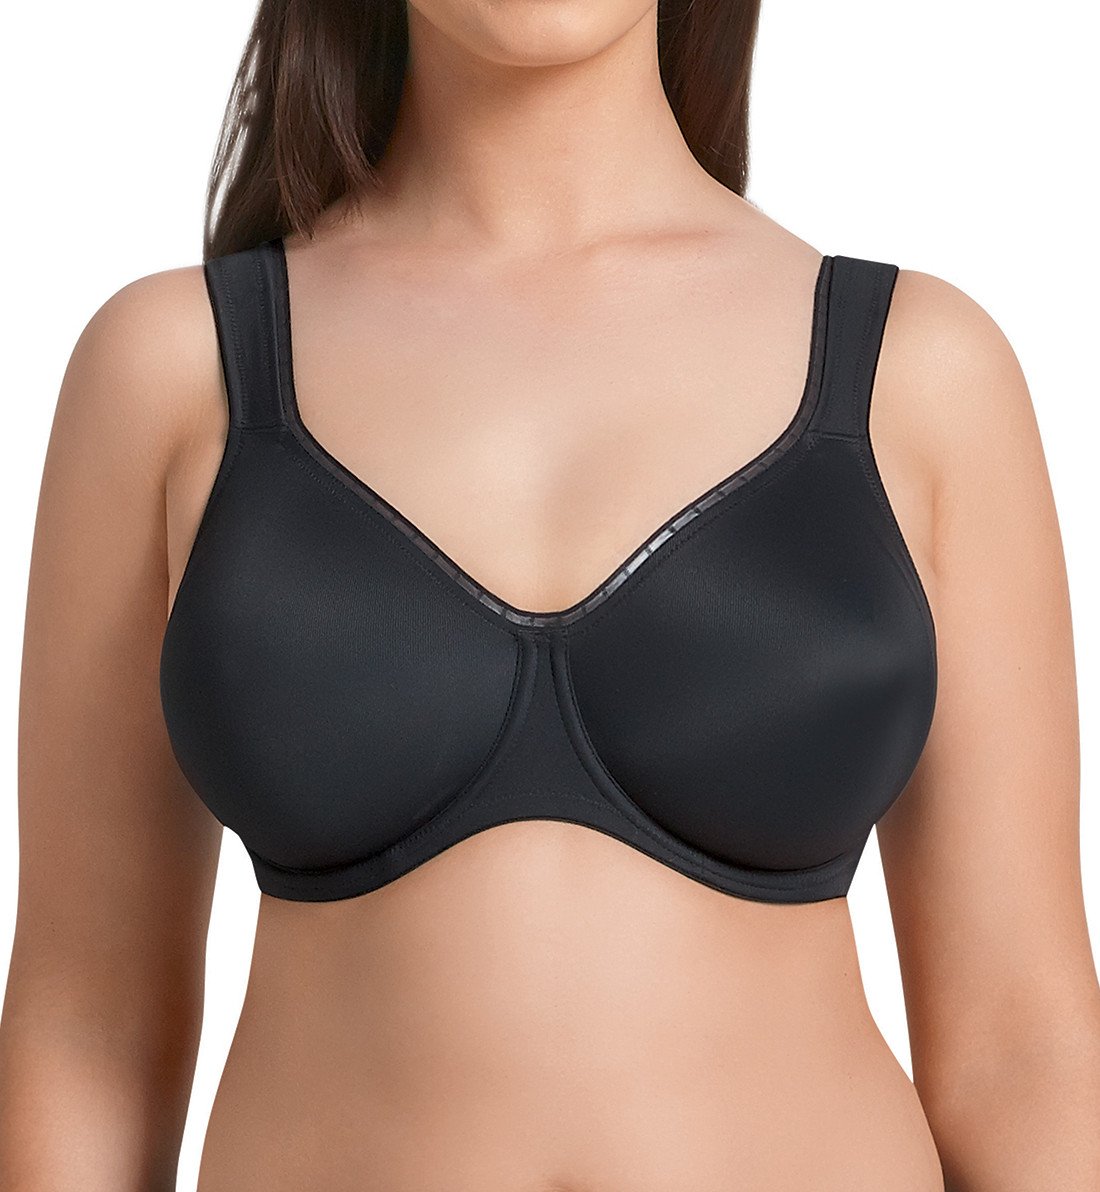 Rosa Faia by Anita Twin Firm Seamless Support Underwire Bra (5694),30D,Black - Black,30D